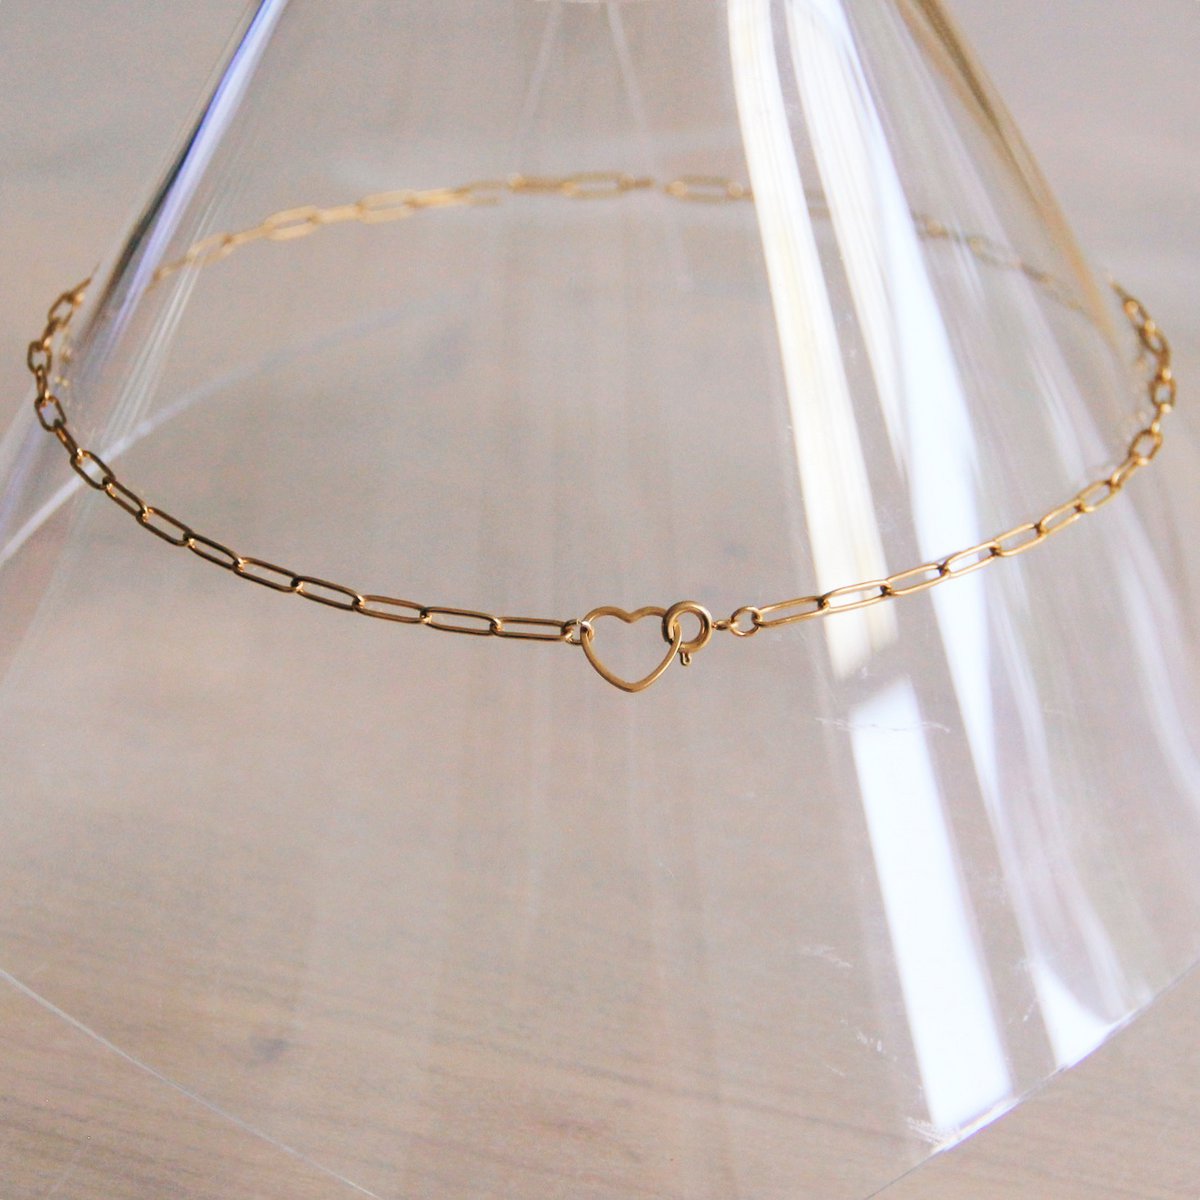 FW281: Stainless steel D-chain necklace with open heart closure